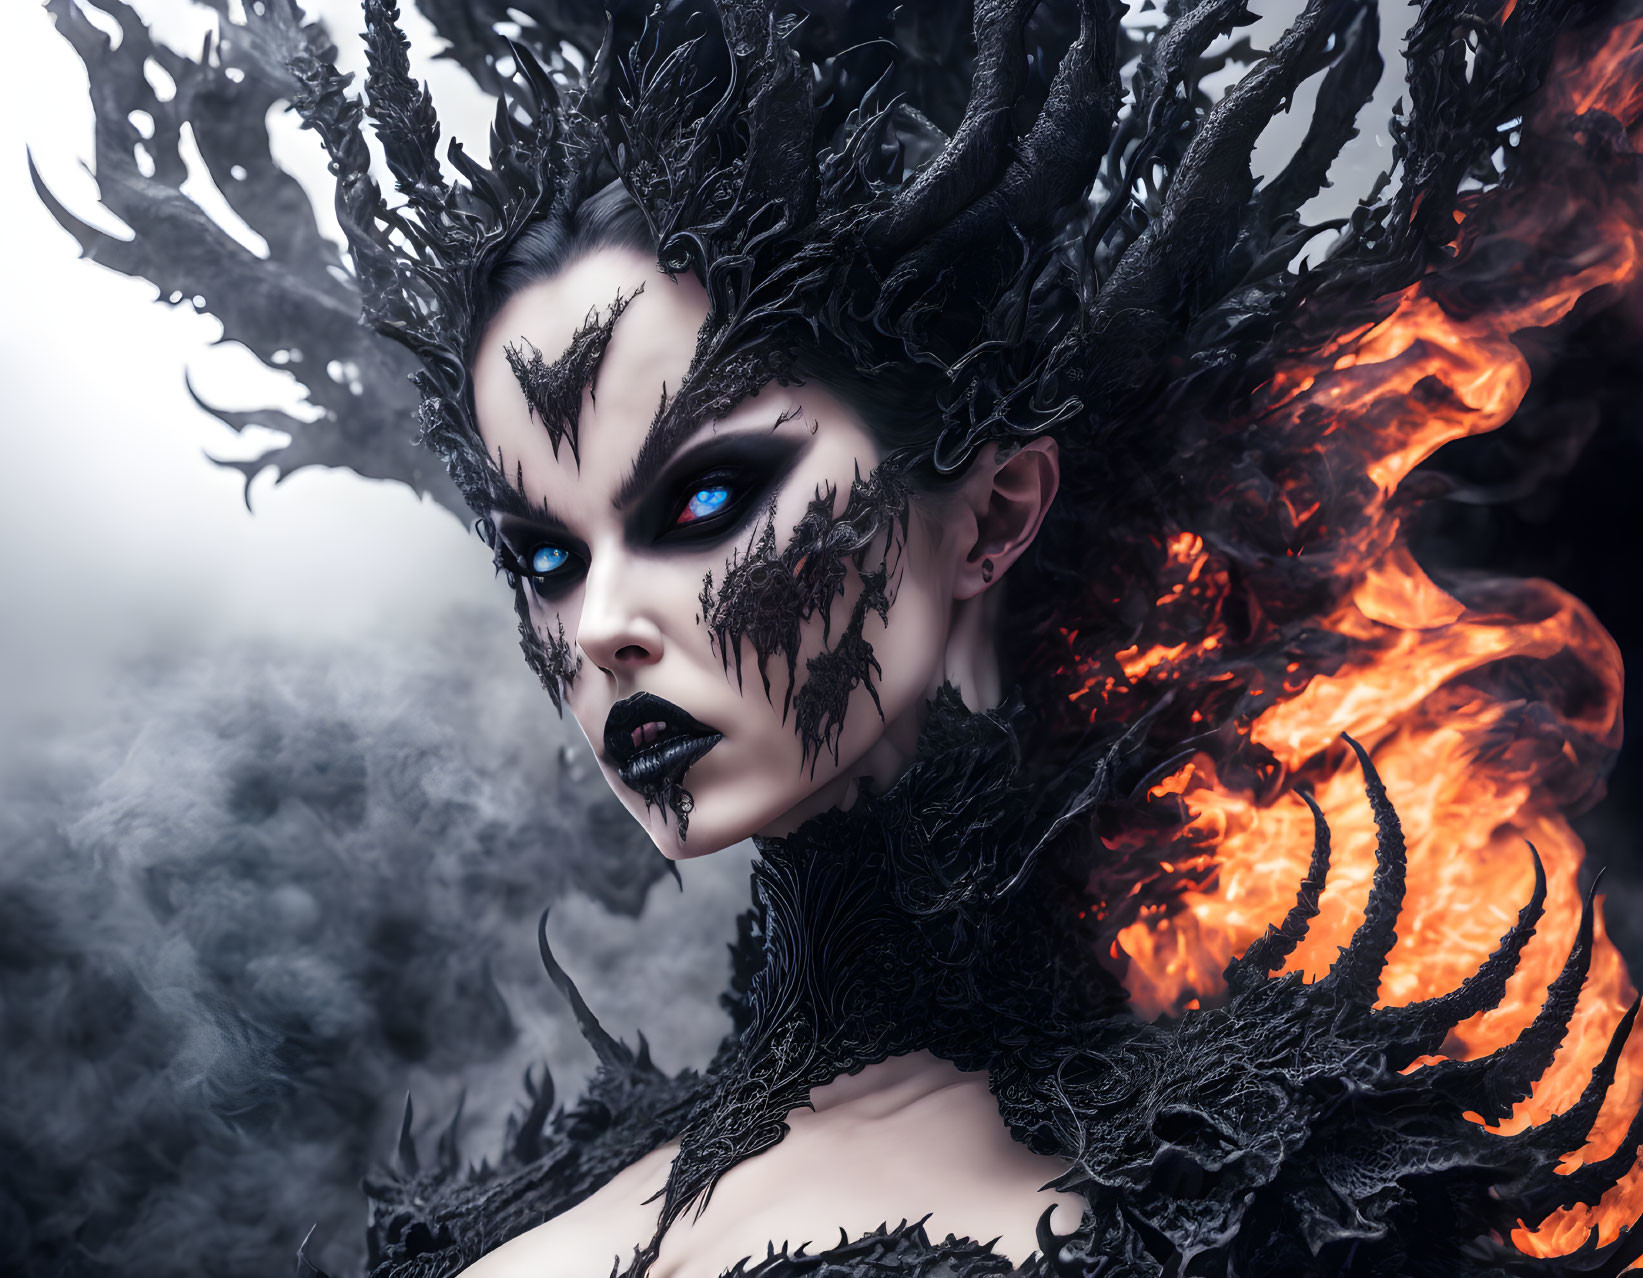 Intense dark makeup and fiery costume fantasy character in smoky setting